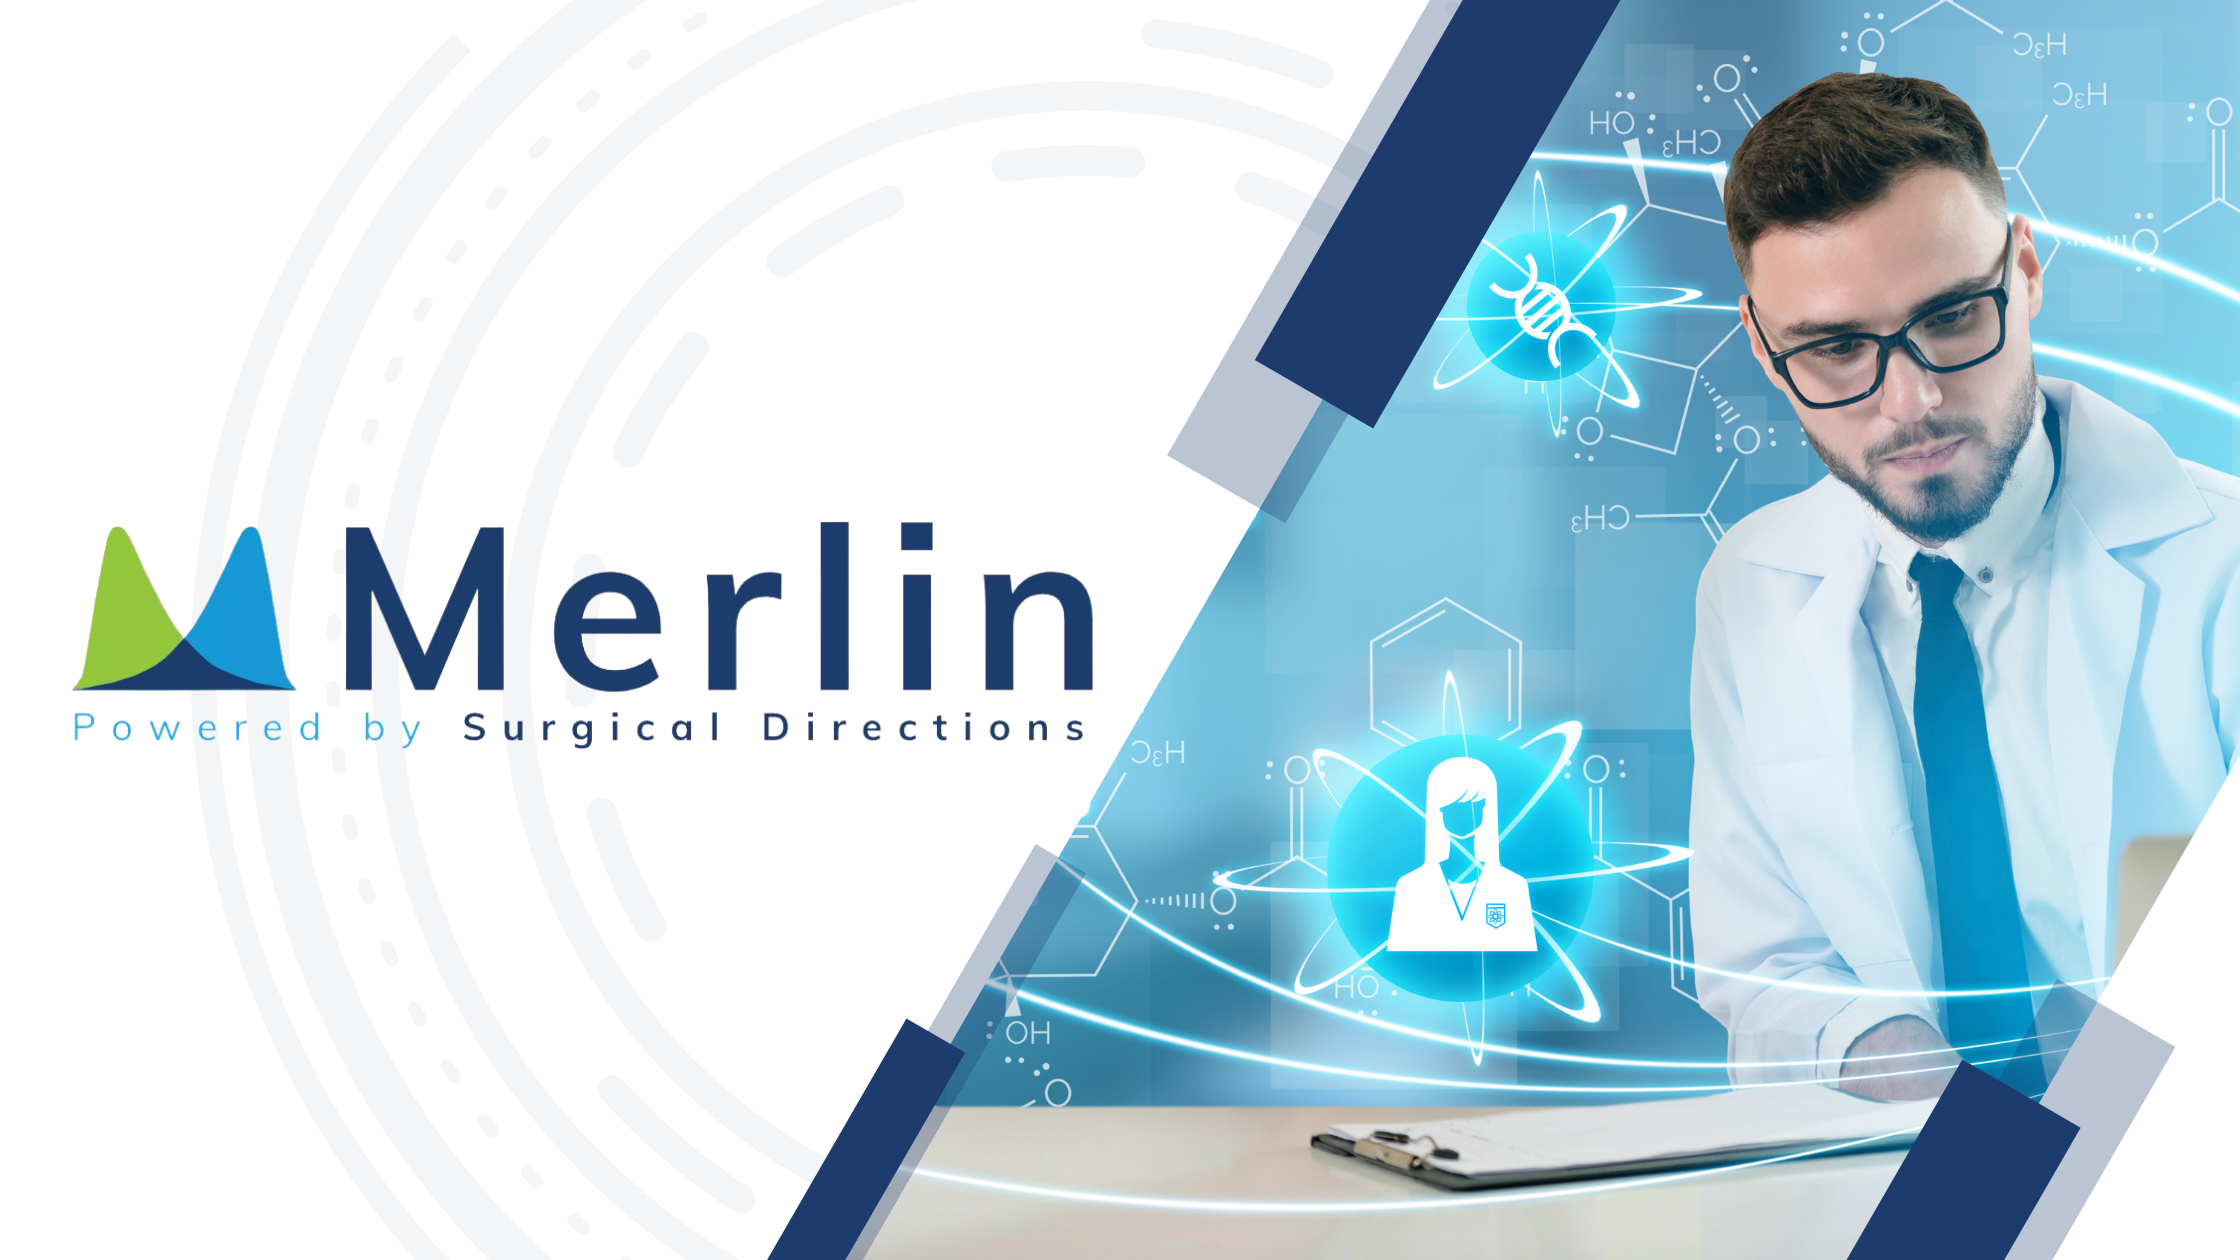 New Product Launch: Surgical Directions Introduces Merlin™ Analytics